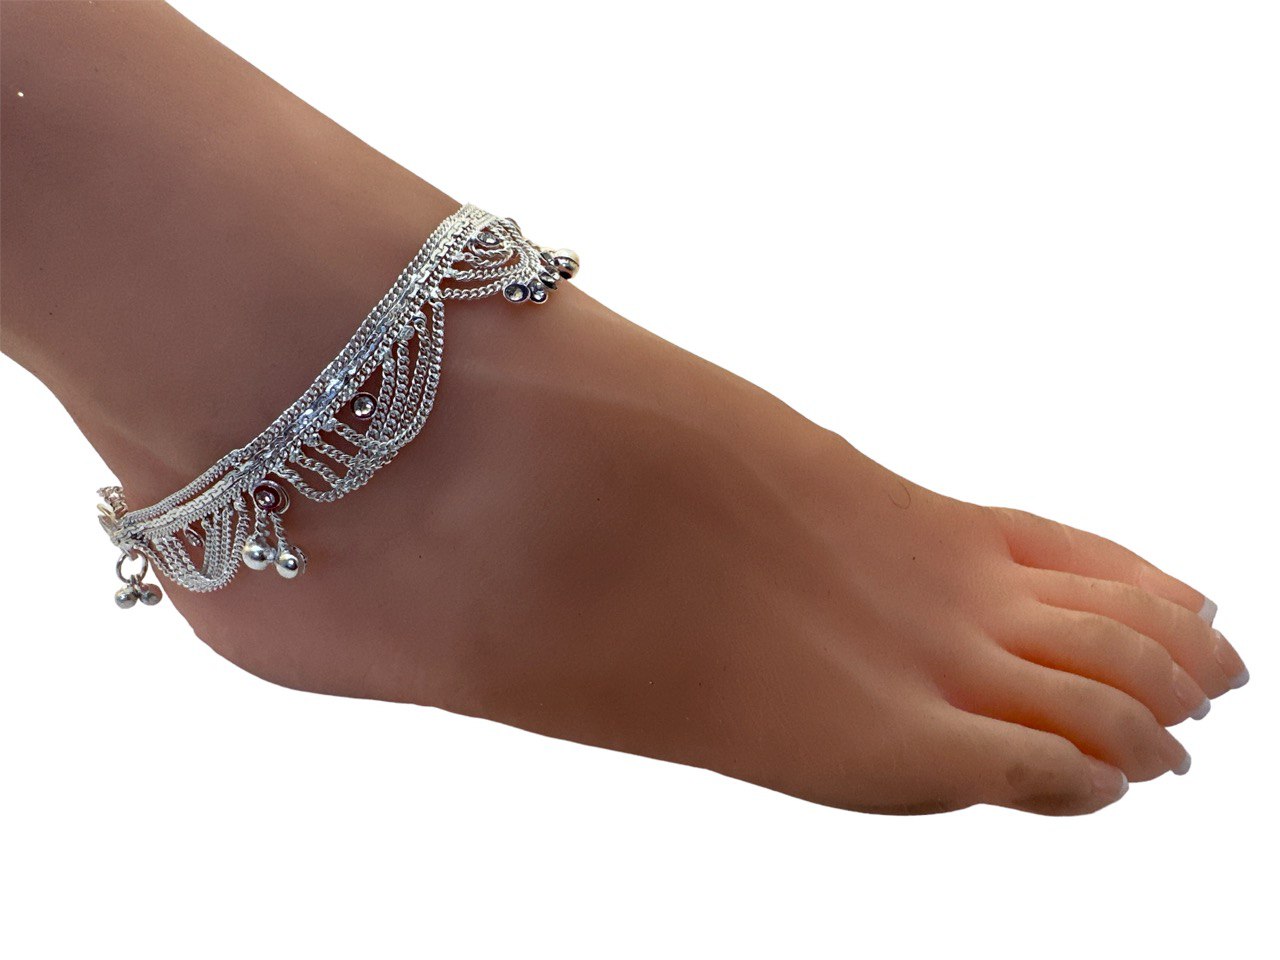 A2 - Anklets Payal Pair for Legs Indian Jewelry